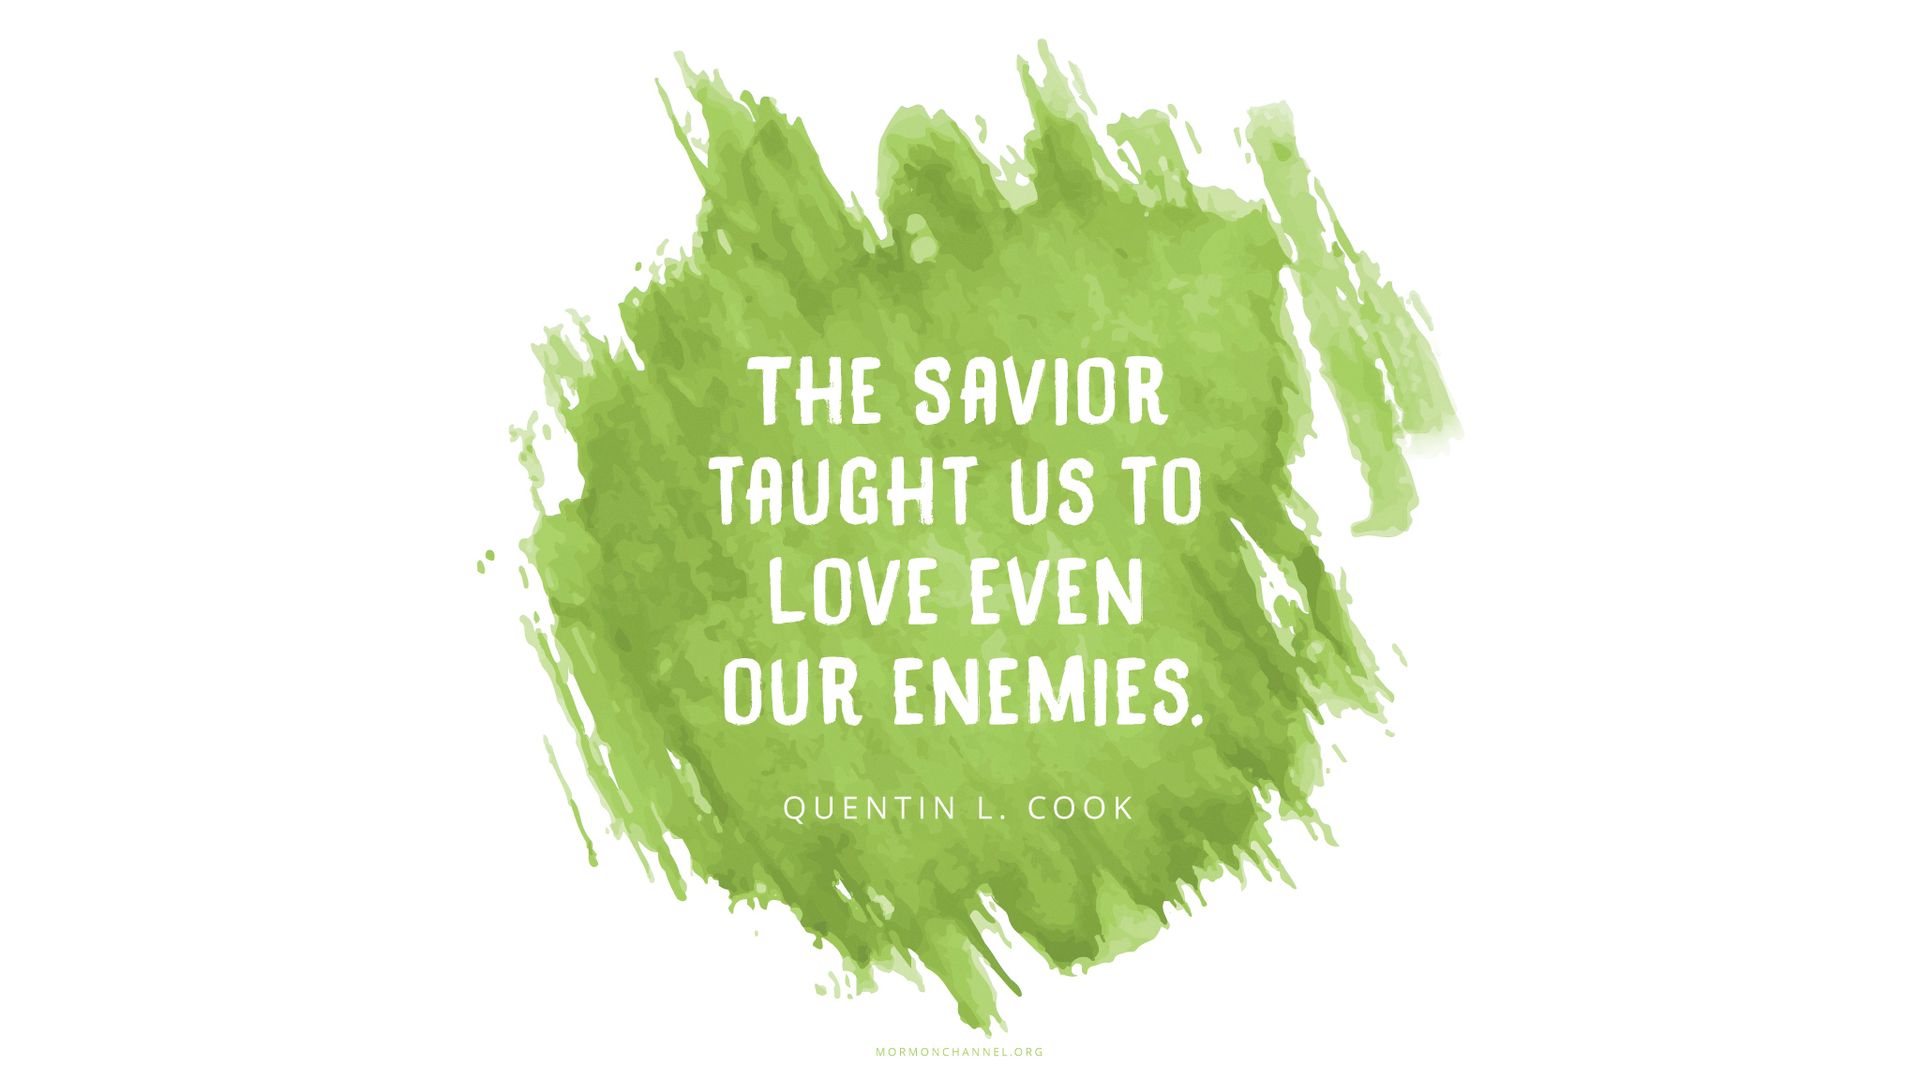 “The Savior taught us to love even our enemies.”—Elder Quentin L. Cook, “We Follow Jesus Christ”